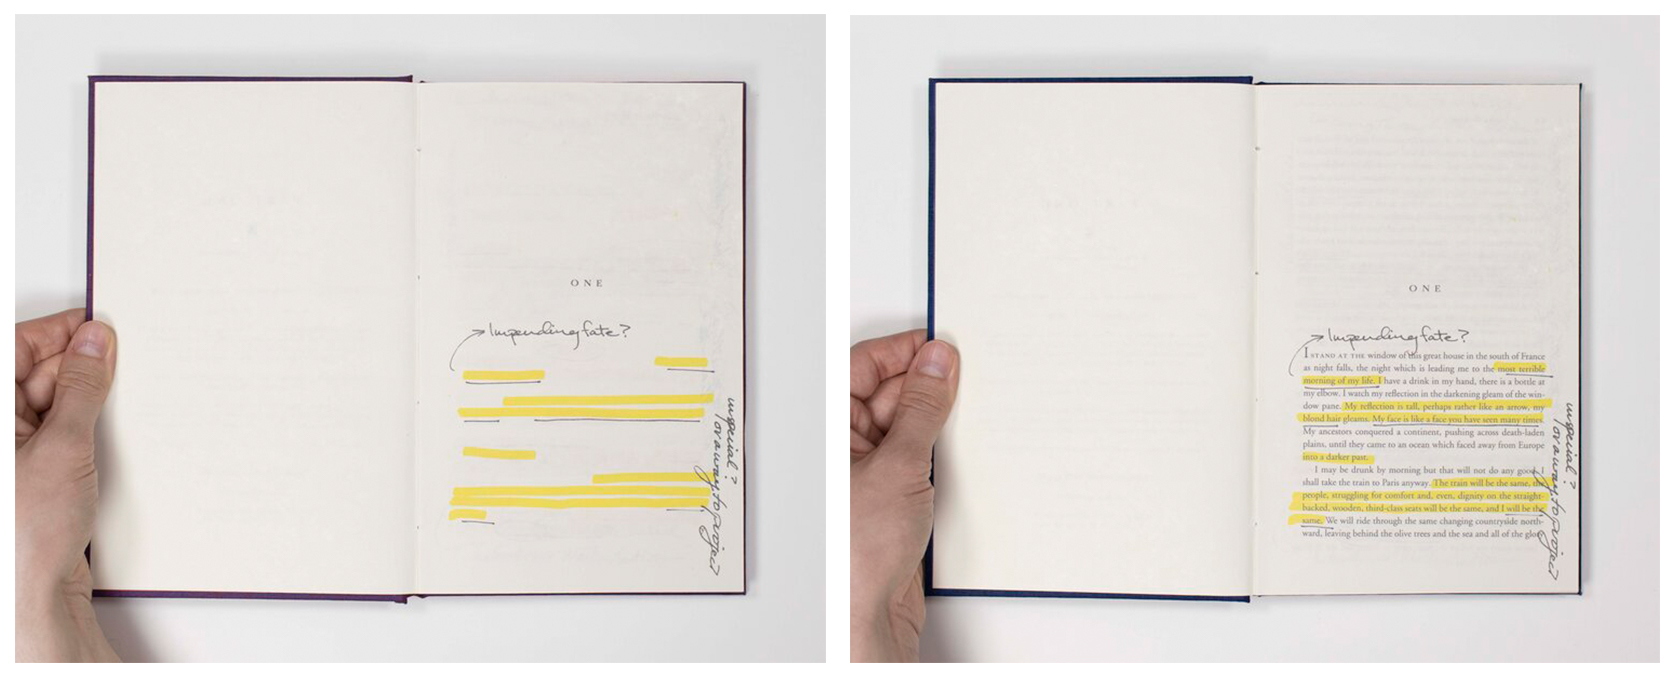 Two photographs side by side of Logan Larsen's Giovanni's Room; The book on the left has no words, just highlighting and annotations, while the book on the right has text and highlighting and annotations